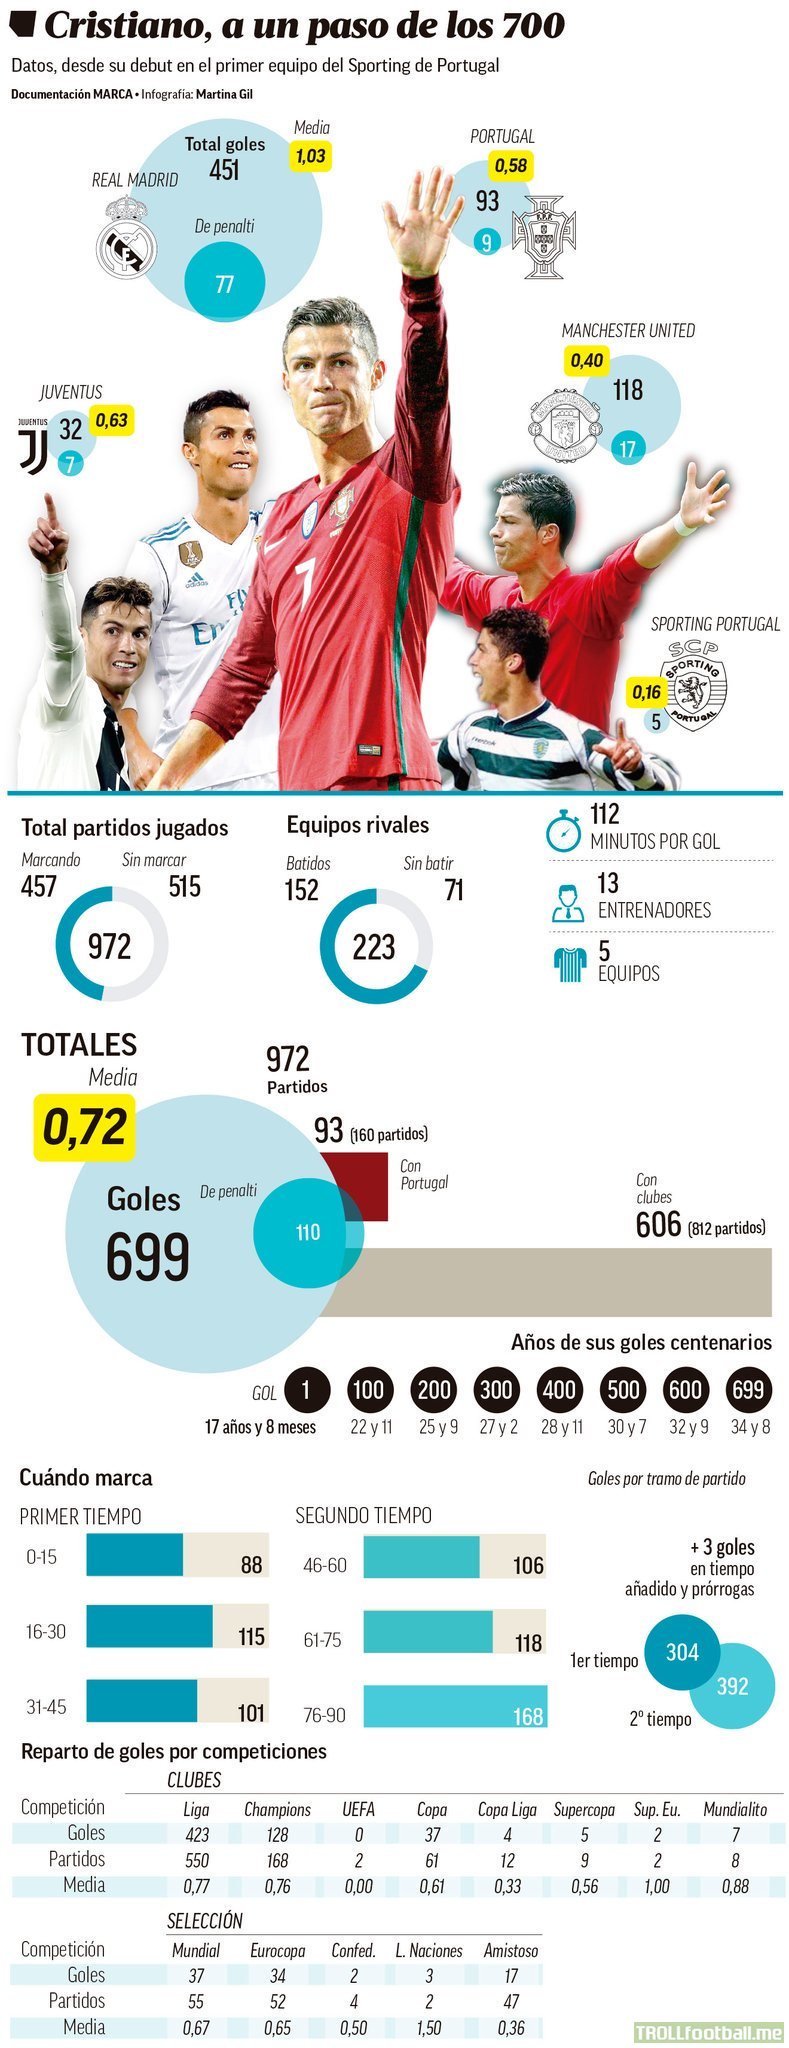 Detailed infographic of Cristiano's 699 career goals